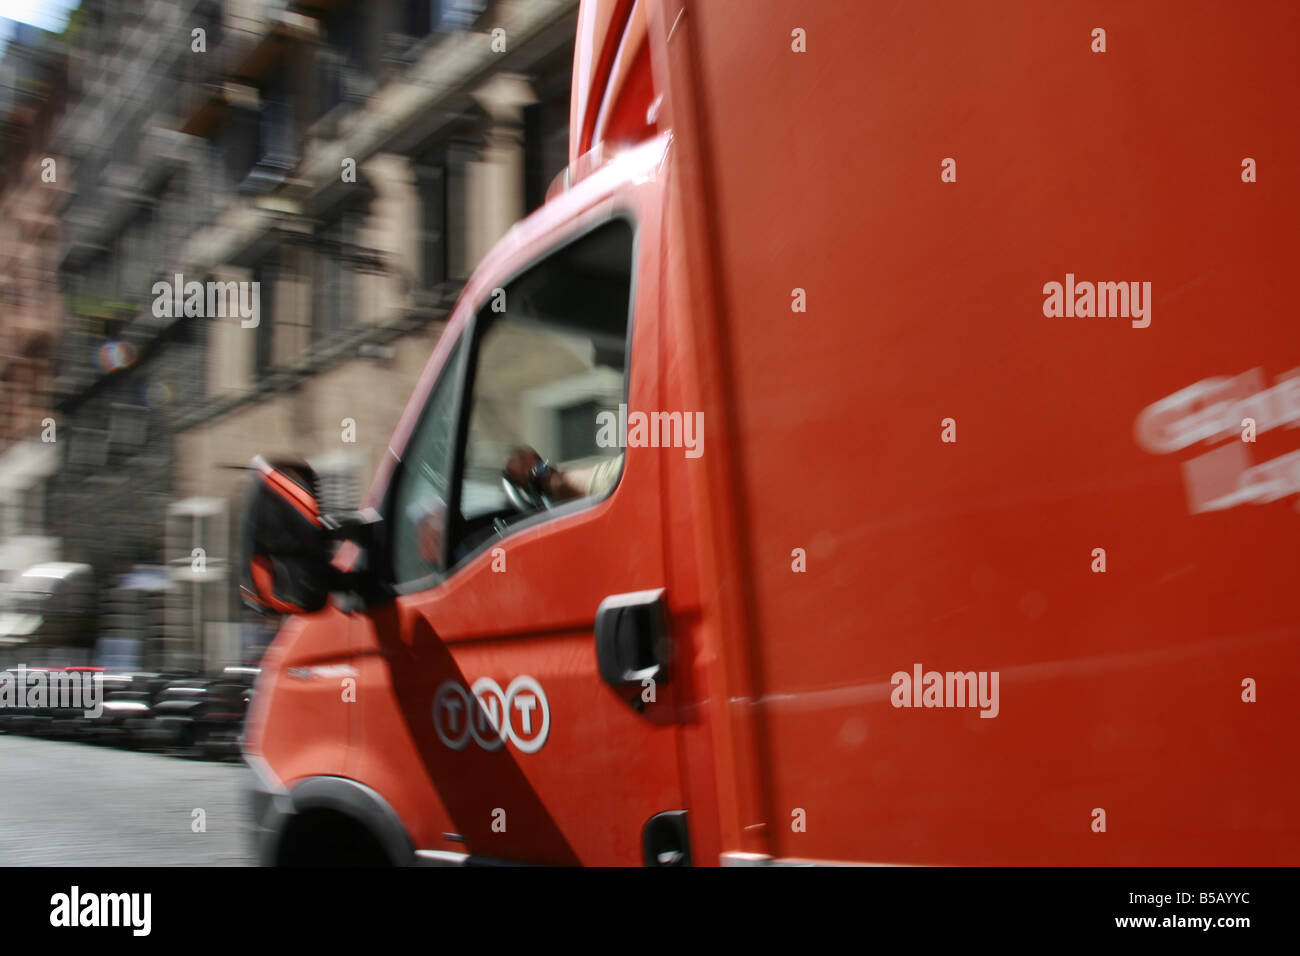 fast orange tnt delivery lorry on street in city town Stock Photo